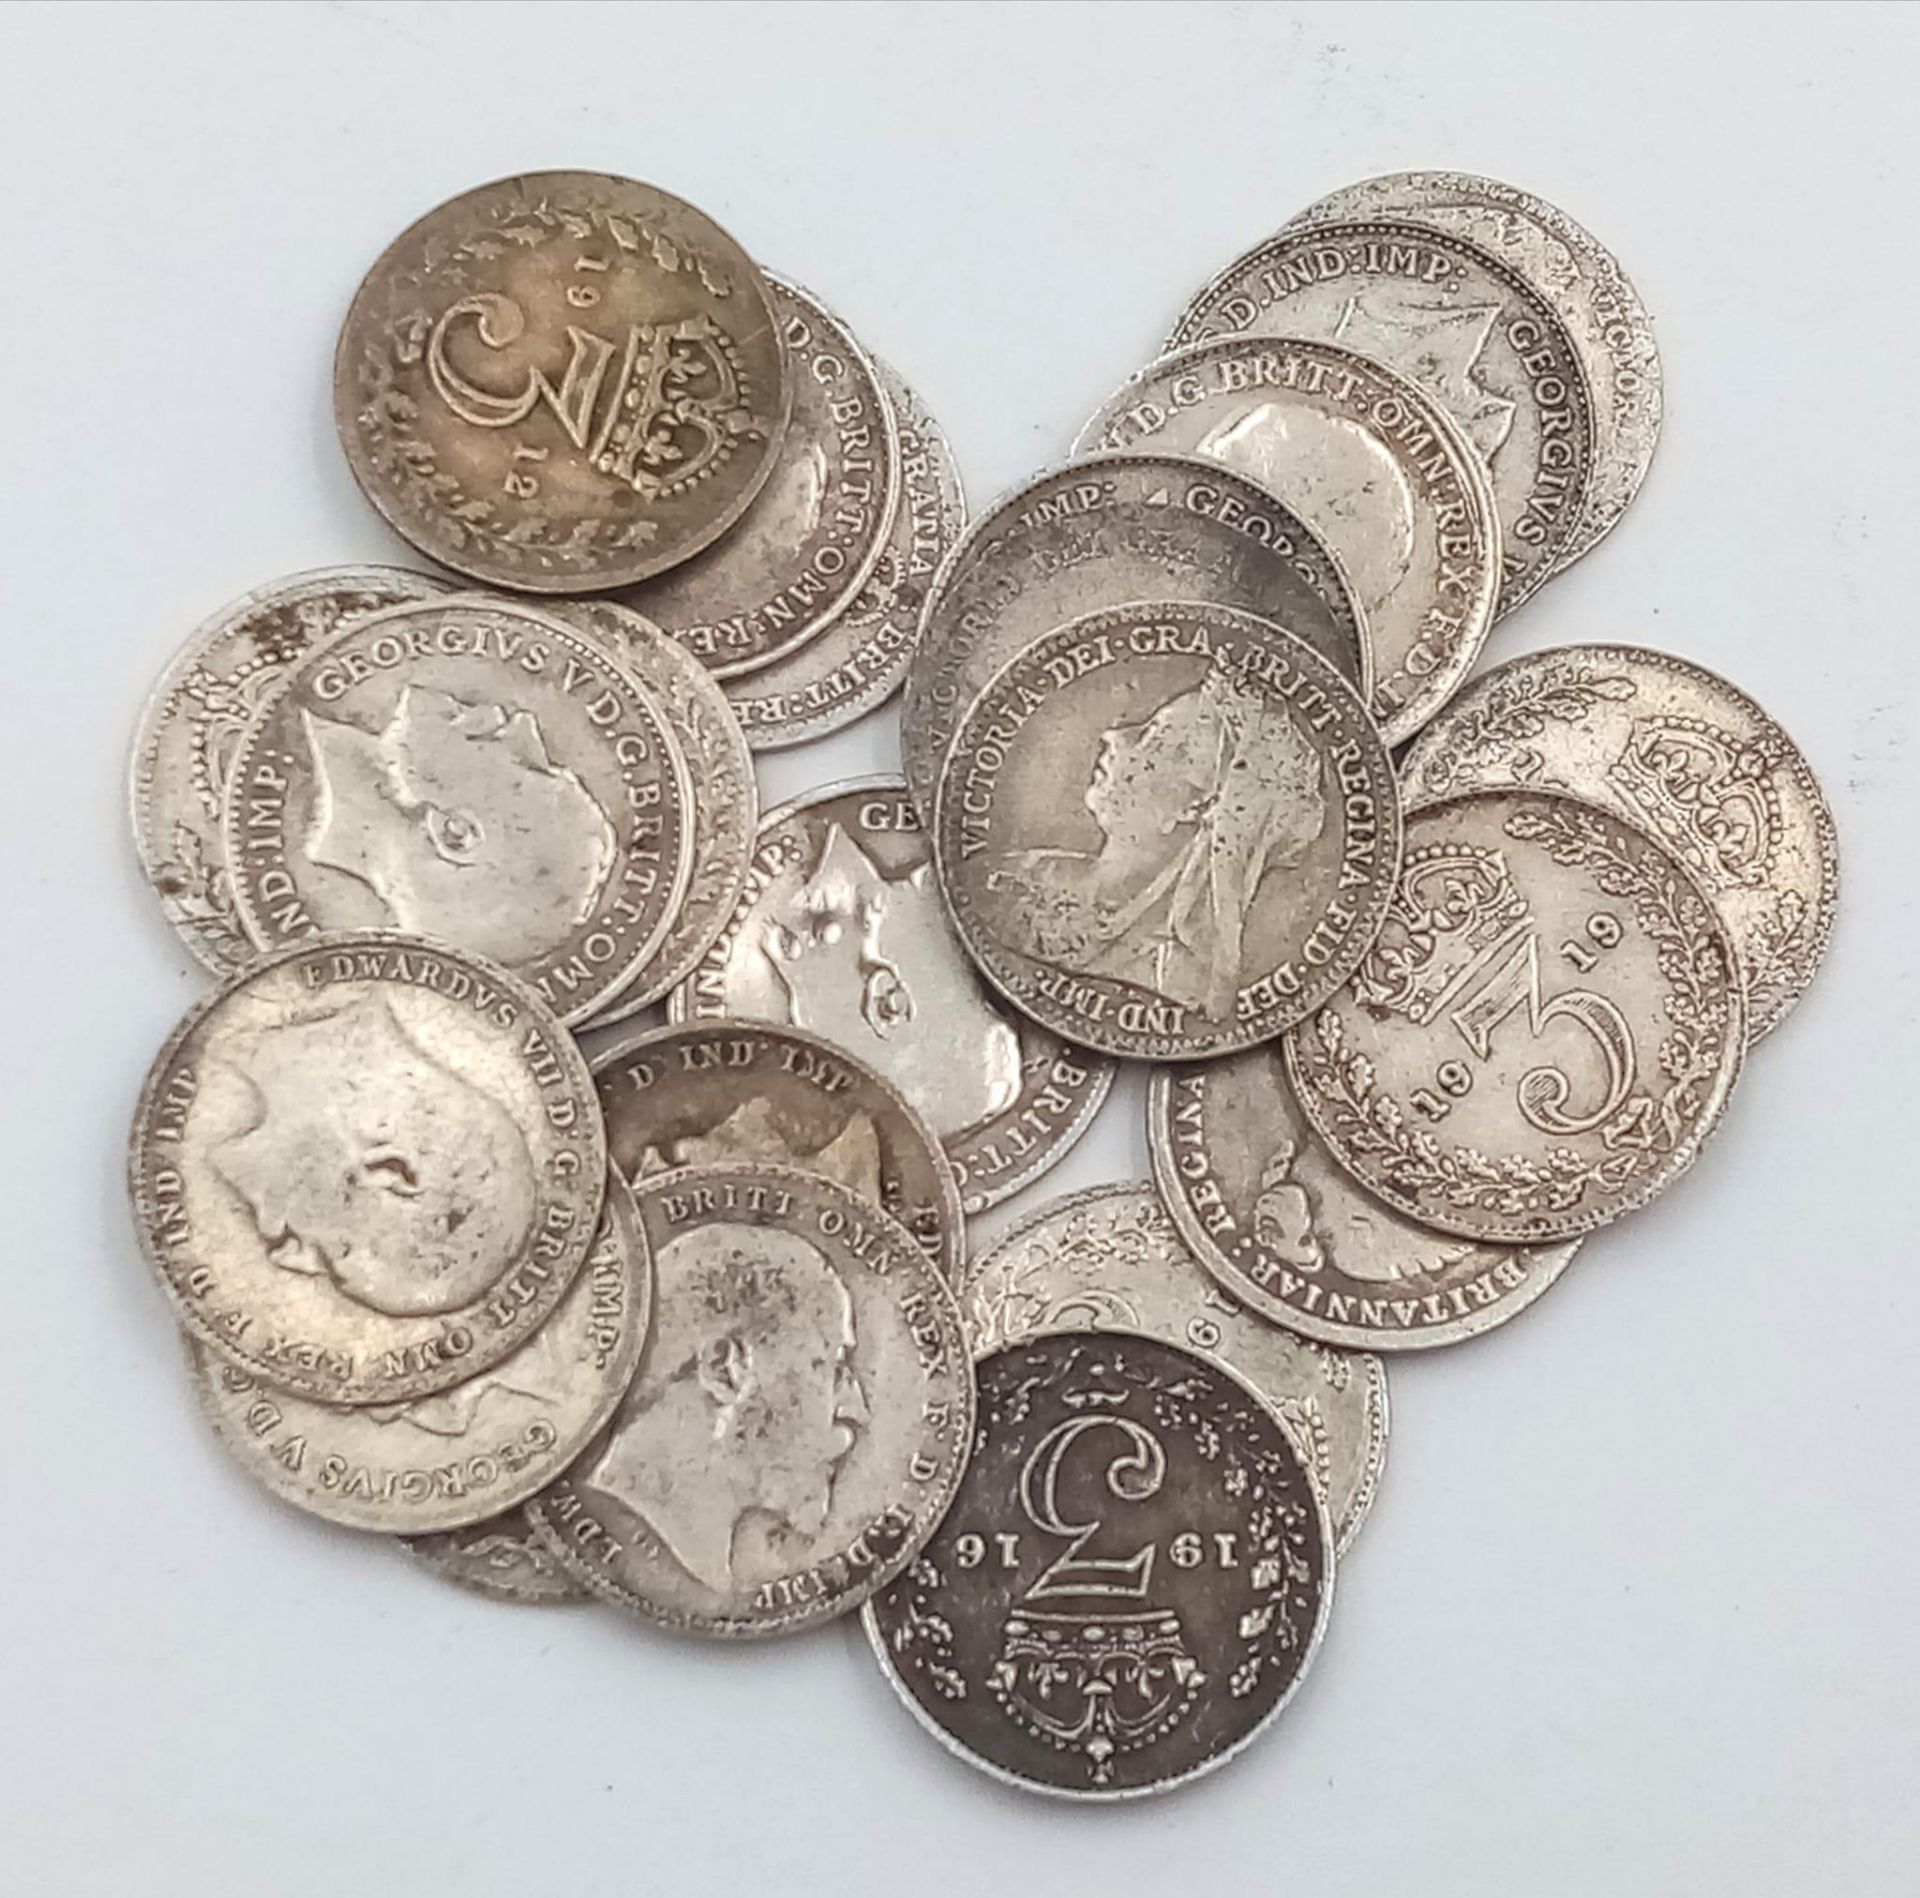 A Collection of 23 British Pre 1920 Silver Threepence coins.